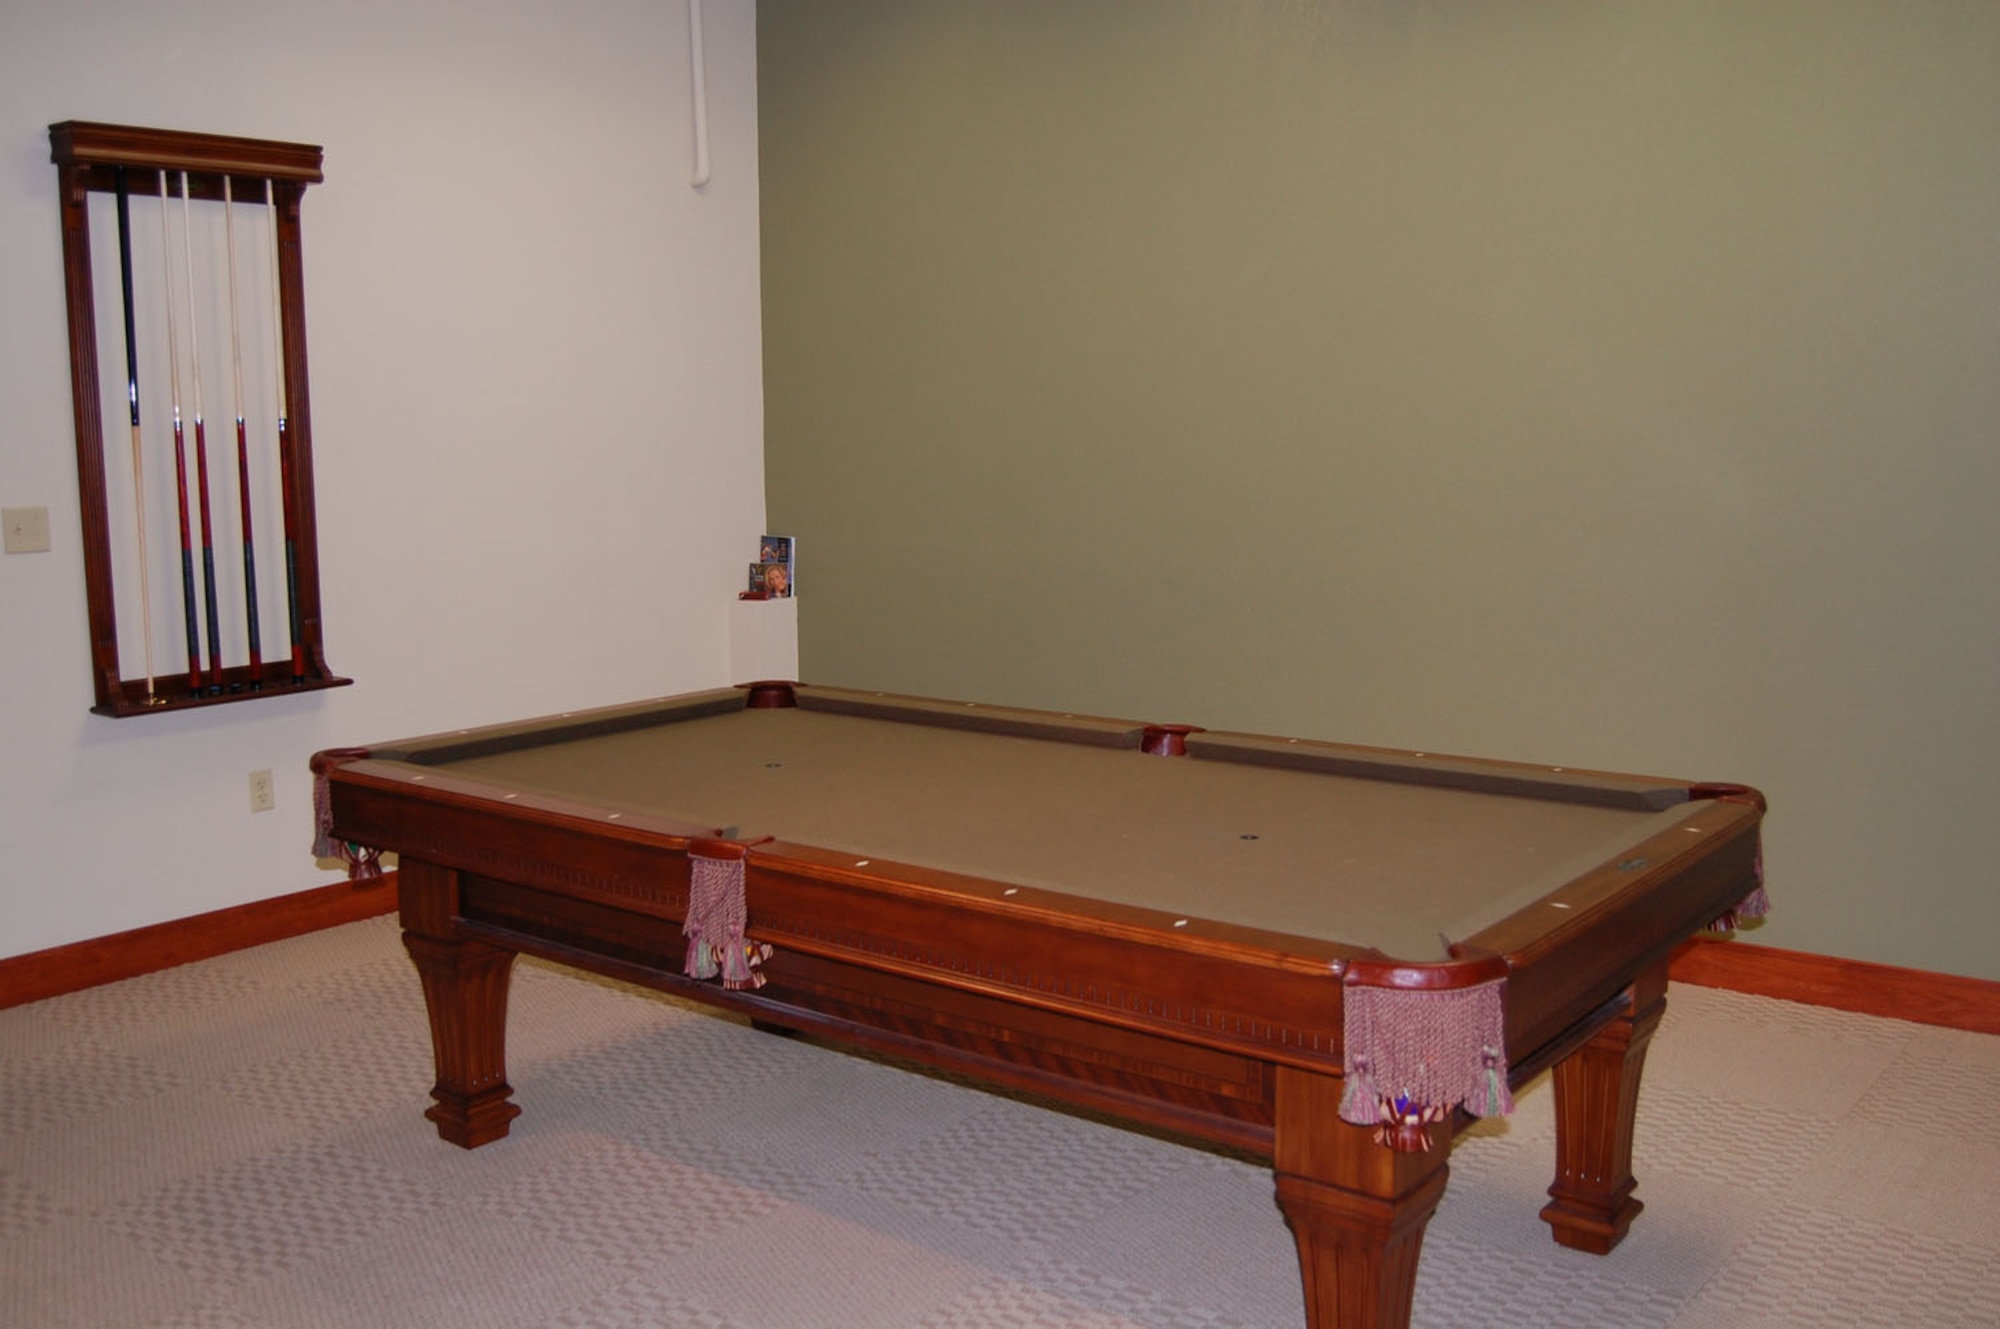 A pool table in the new AFMAO break room allows staff to relax with some friendly competition. The area also includes a Wii system, ping-pong and foosball tables. (U.S. Air Force photo by Maj. Shannon Mann, AFMAO/PA)